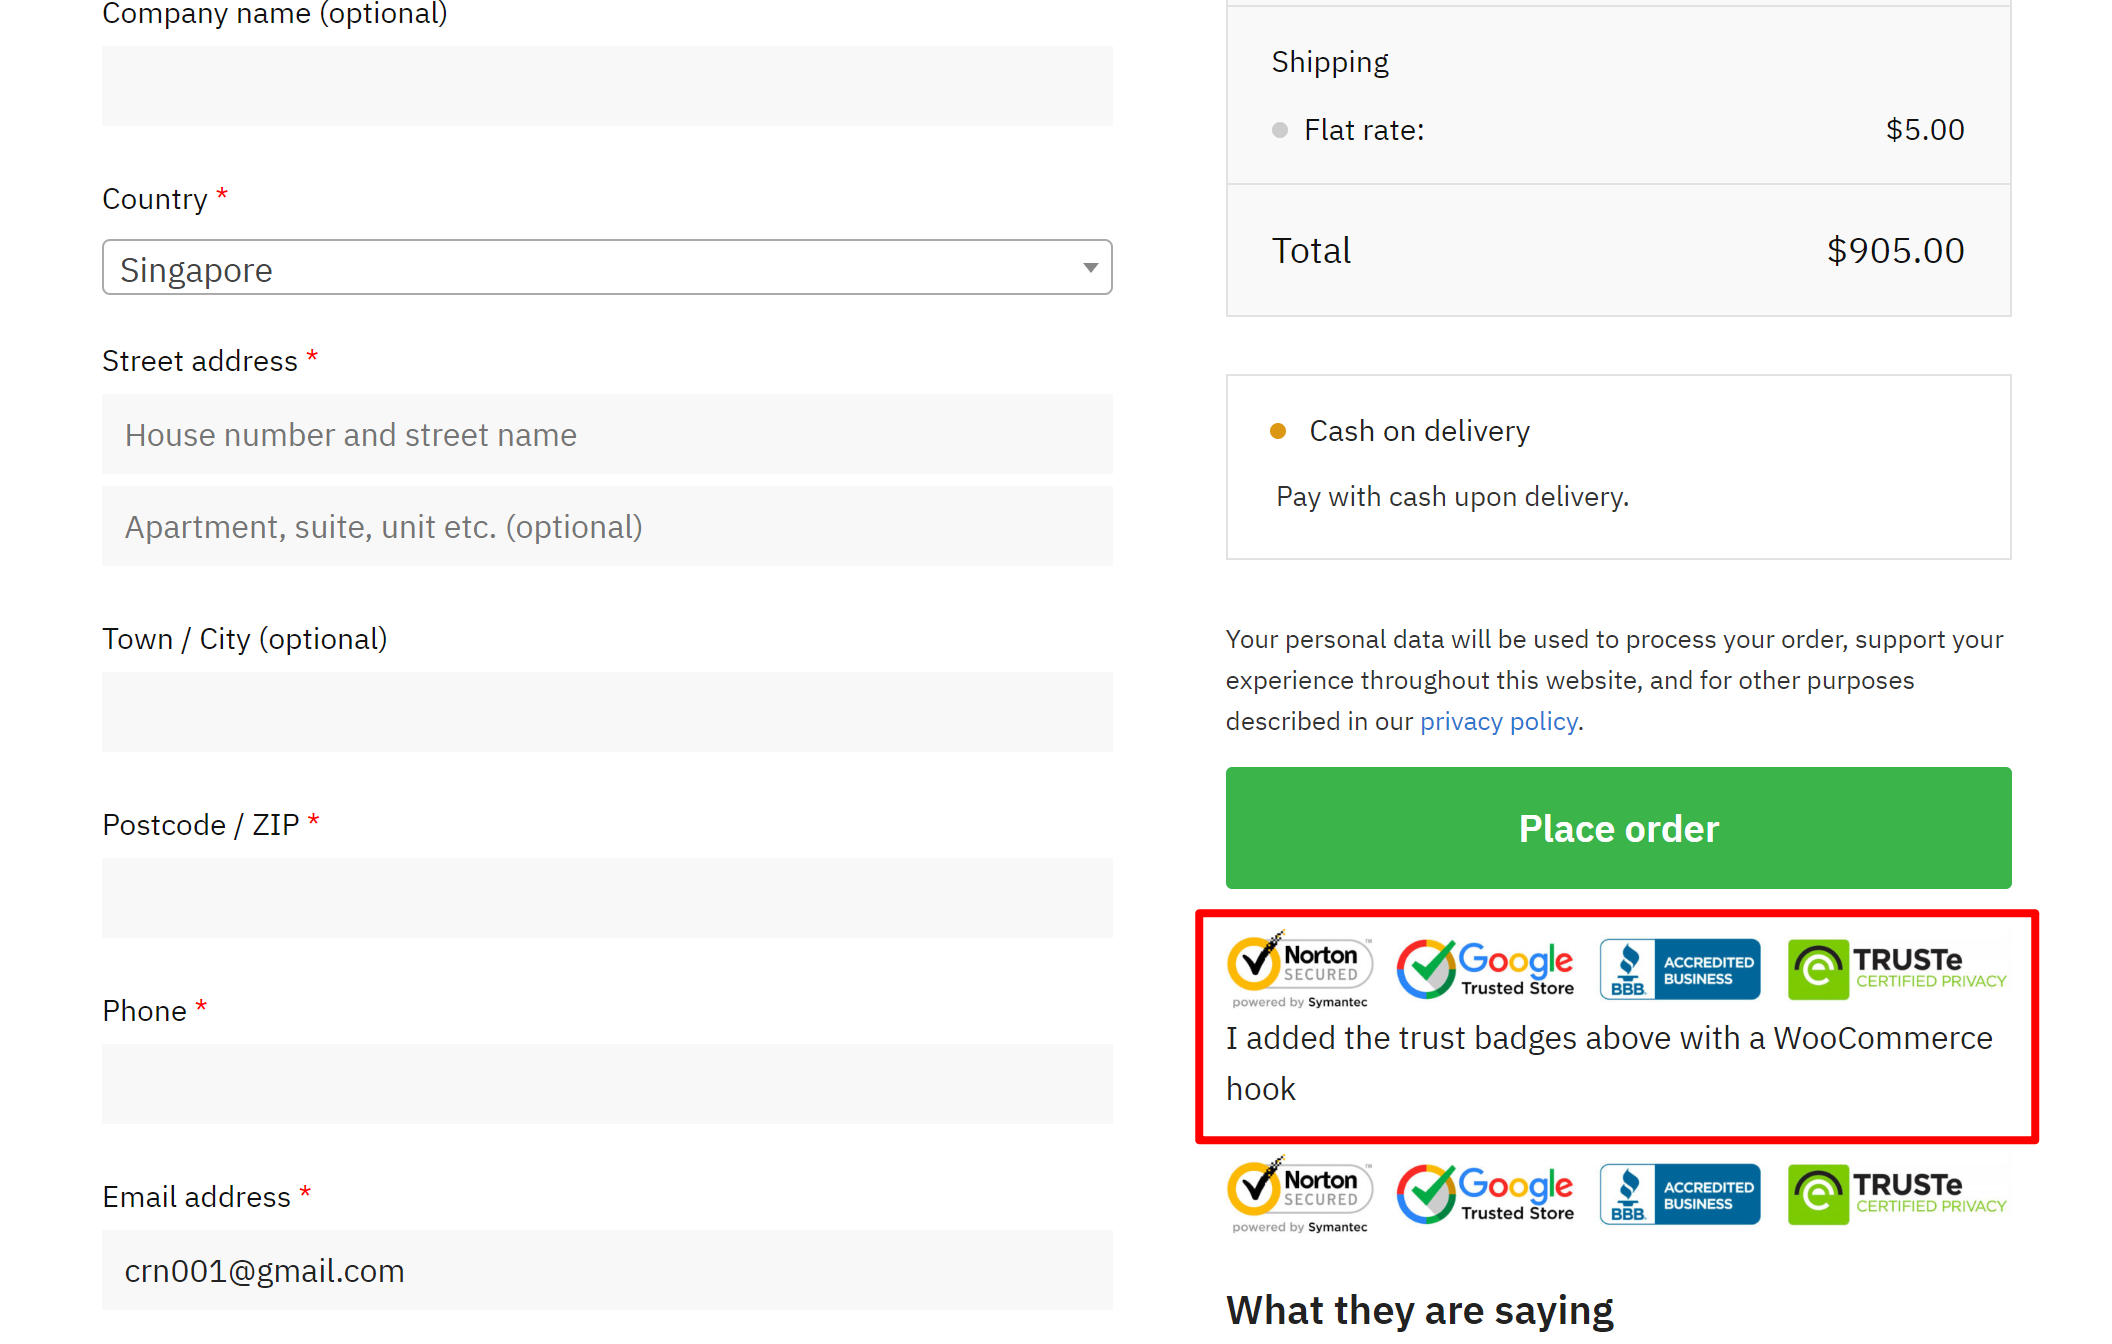 Example of WooCommerce hooks on the checkout page